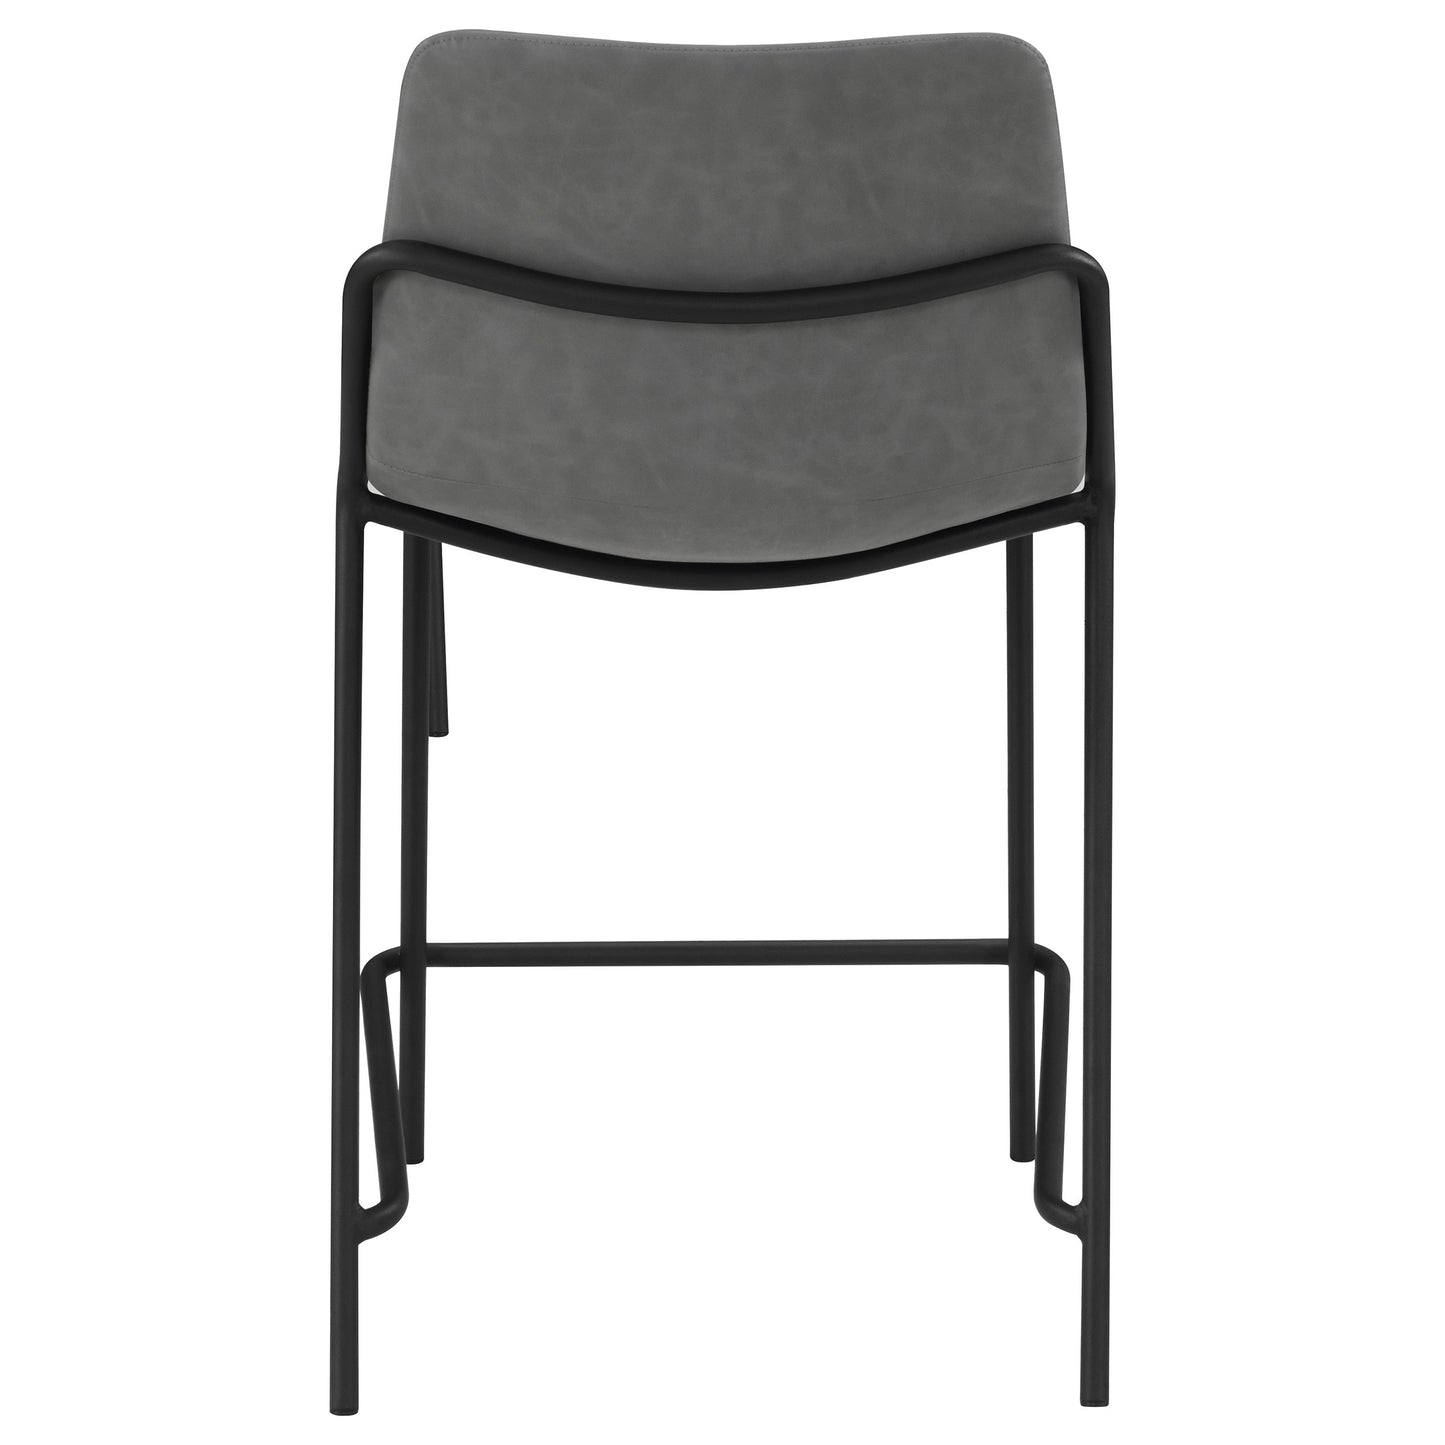 Earnest Solid Back Upholstered Counter Height Stools Grey and Black (Set of 2)